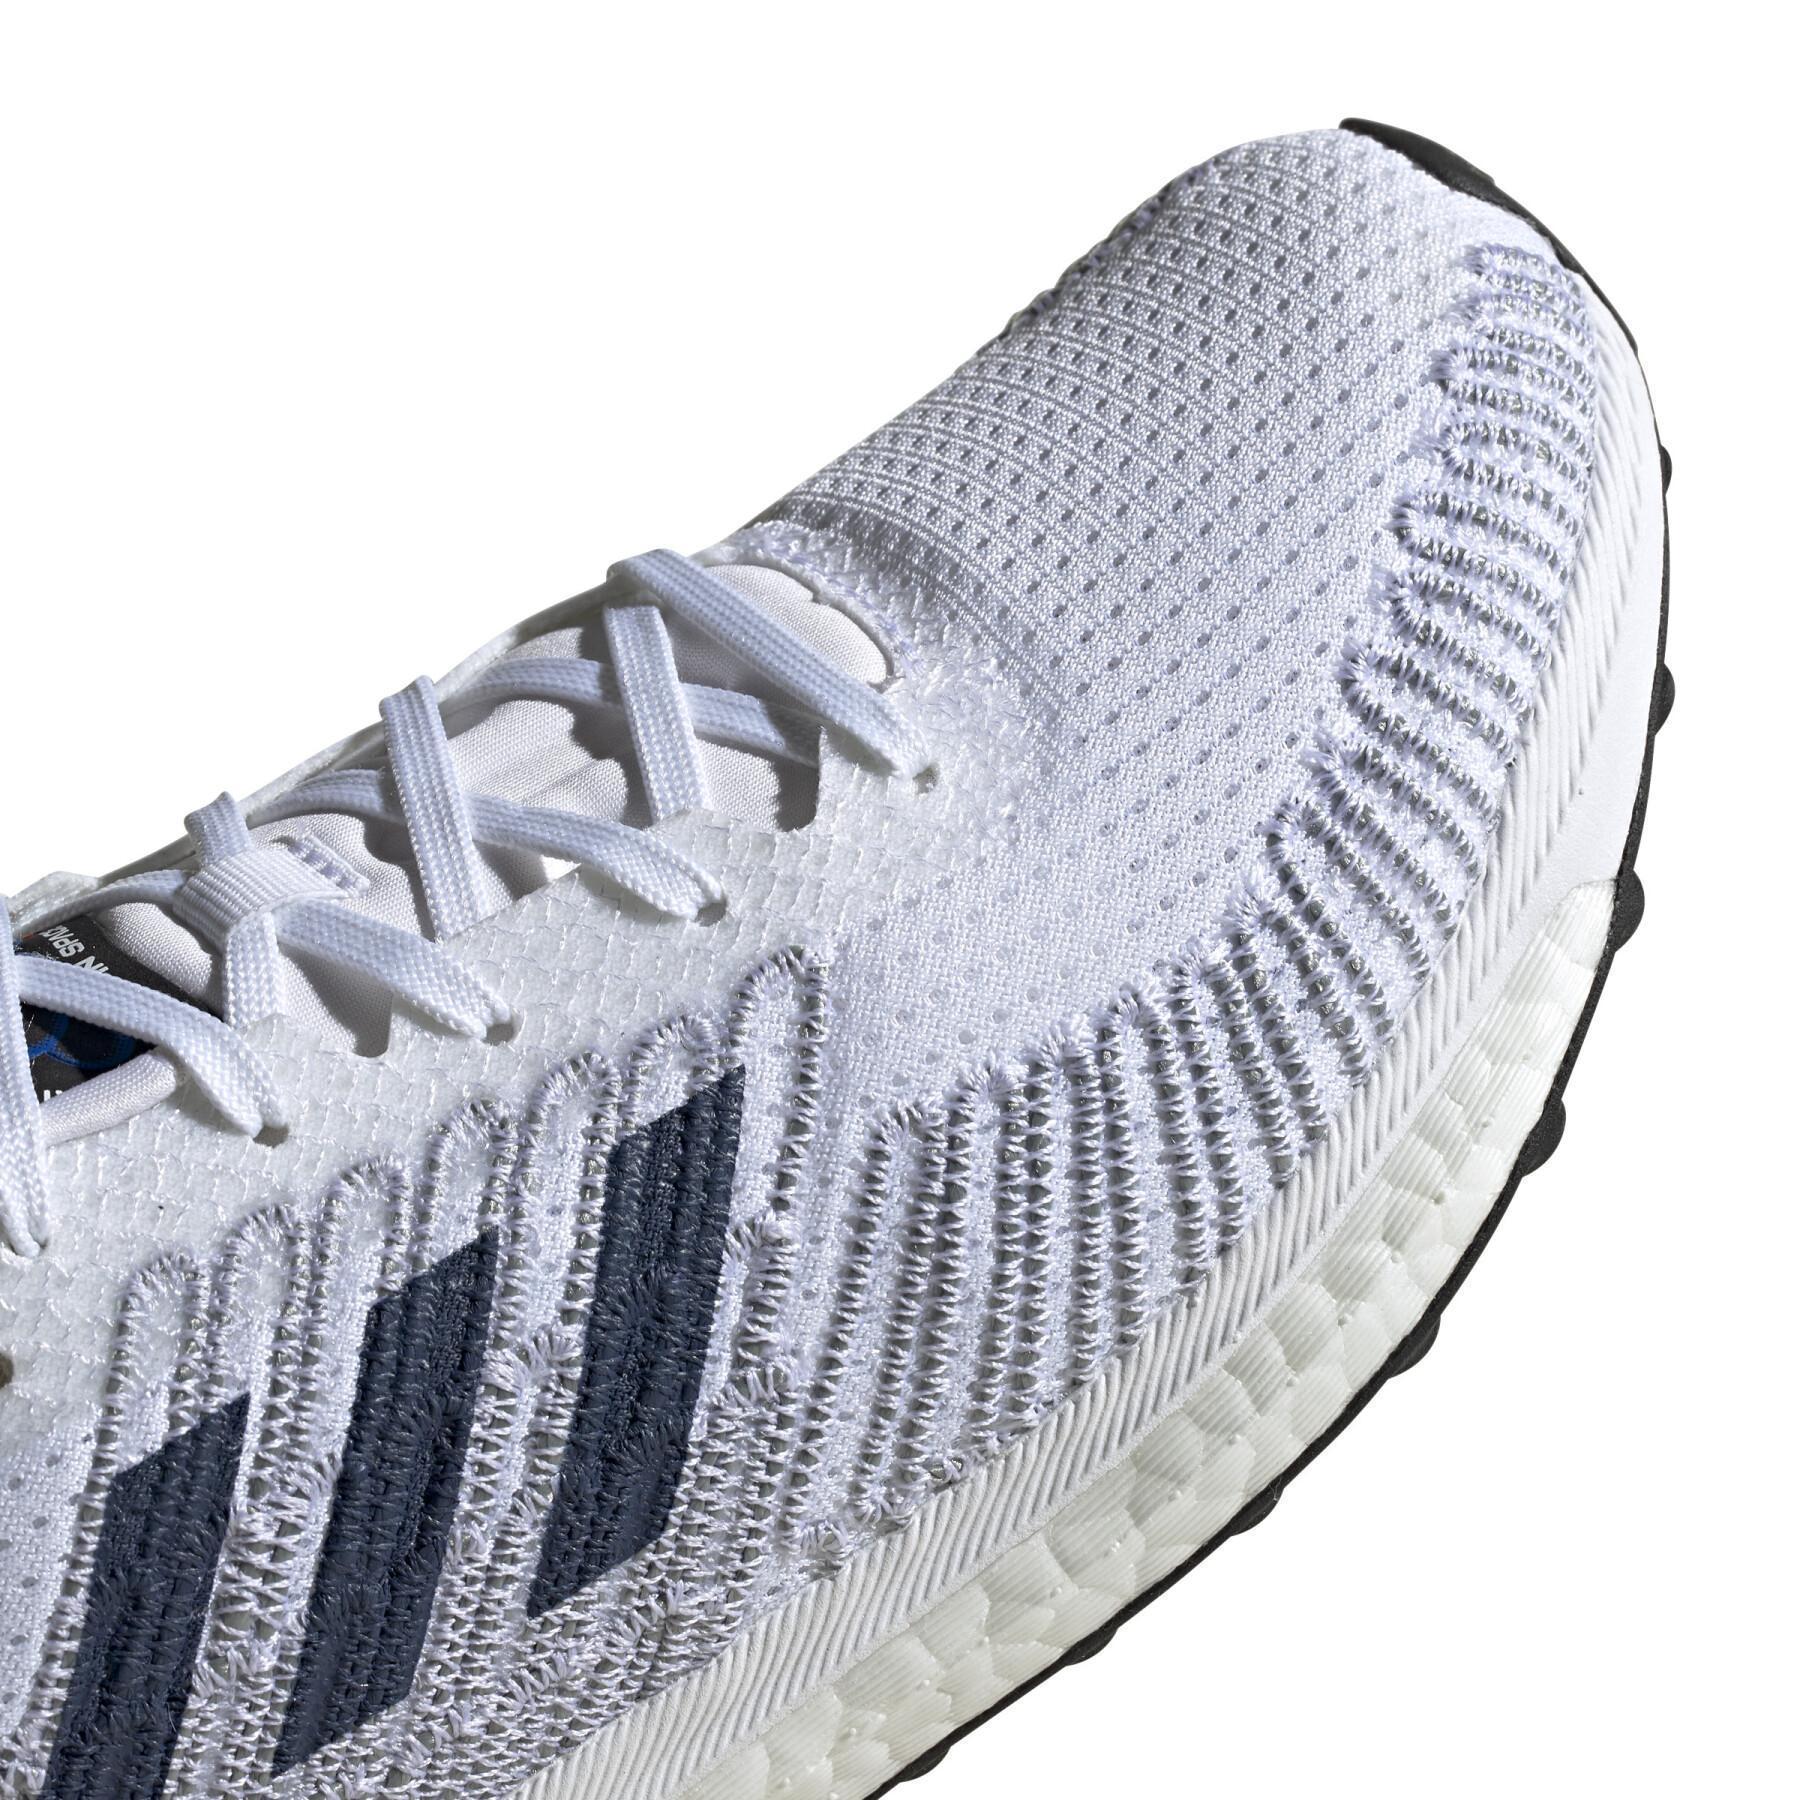 Women's running shoes adidas Solarboost ST 19